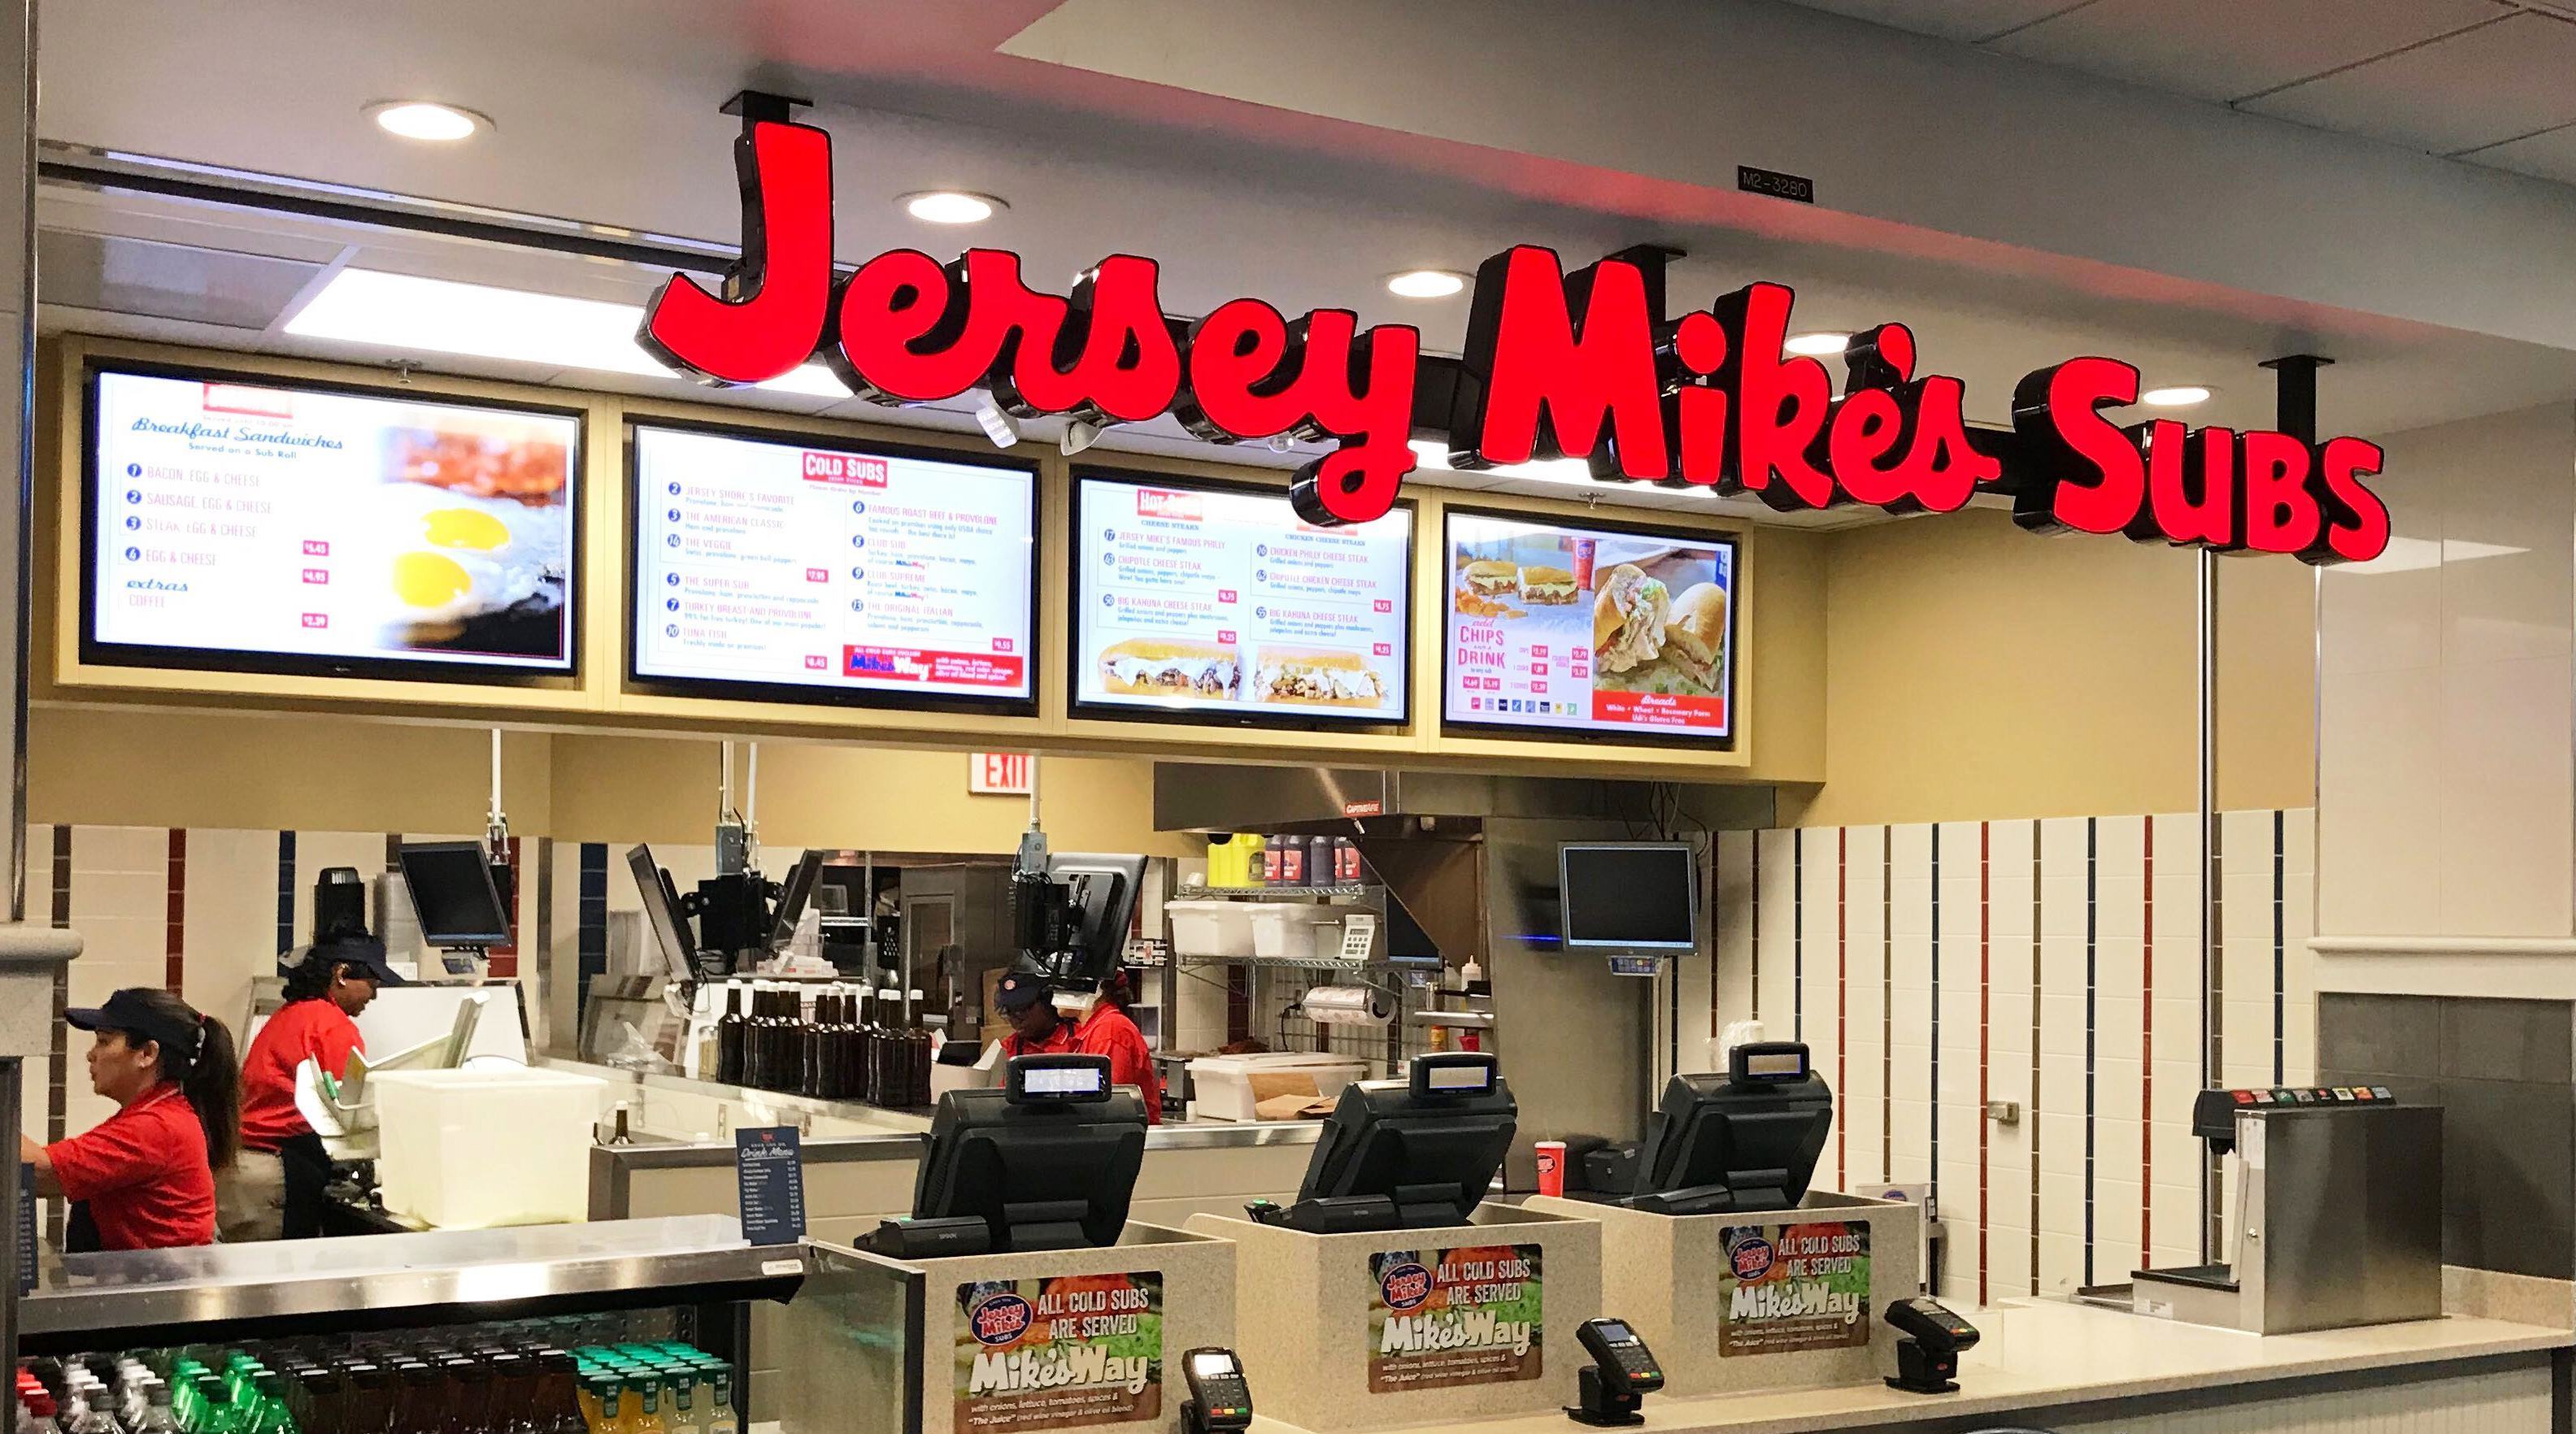 jersey mike's prices 2020